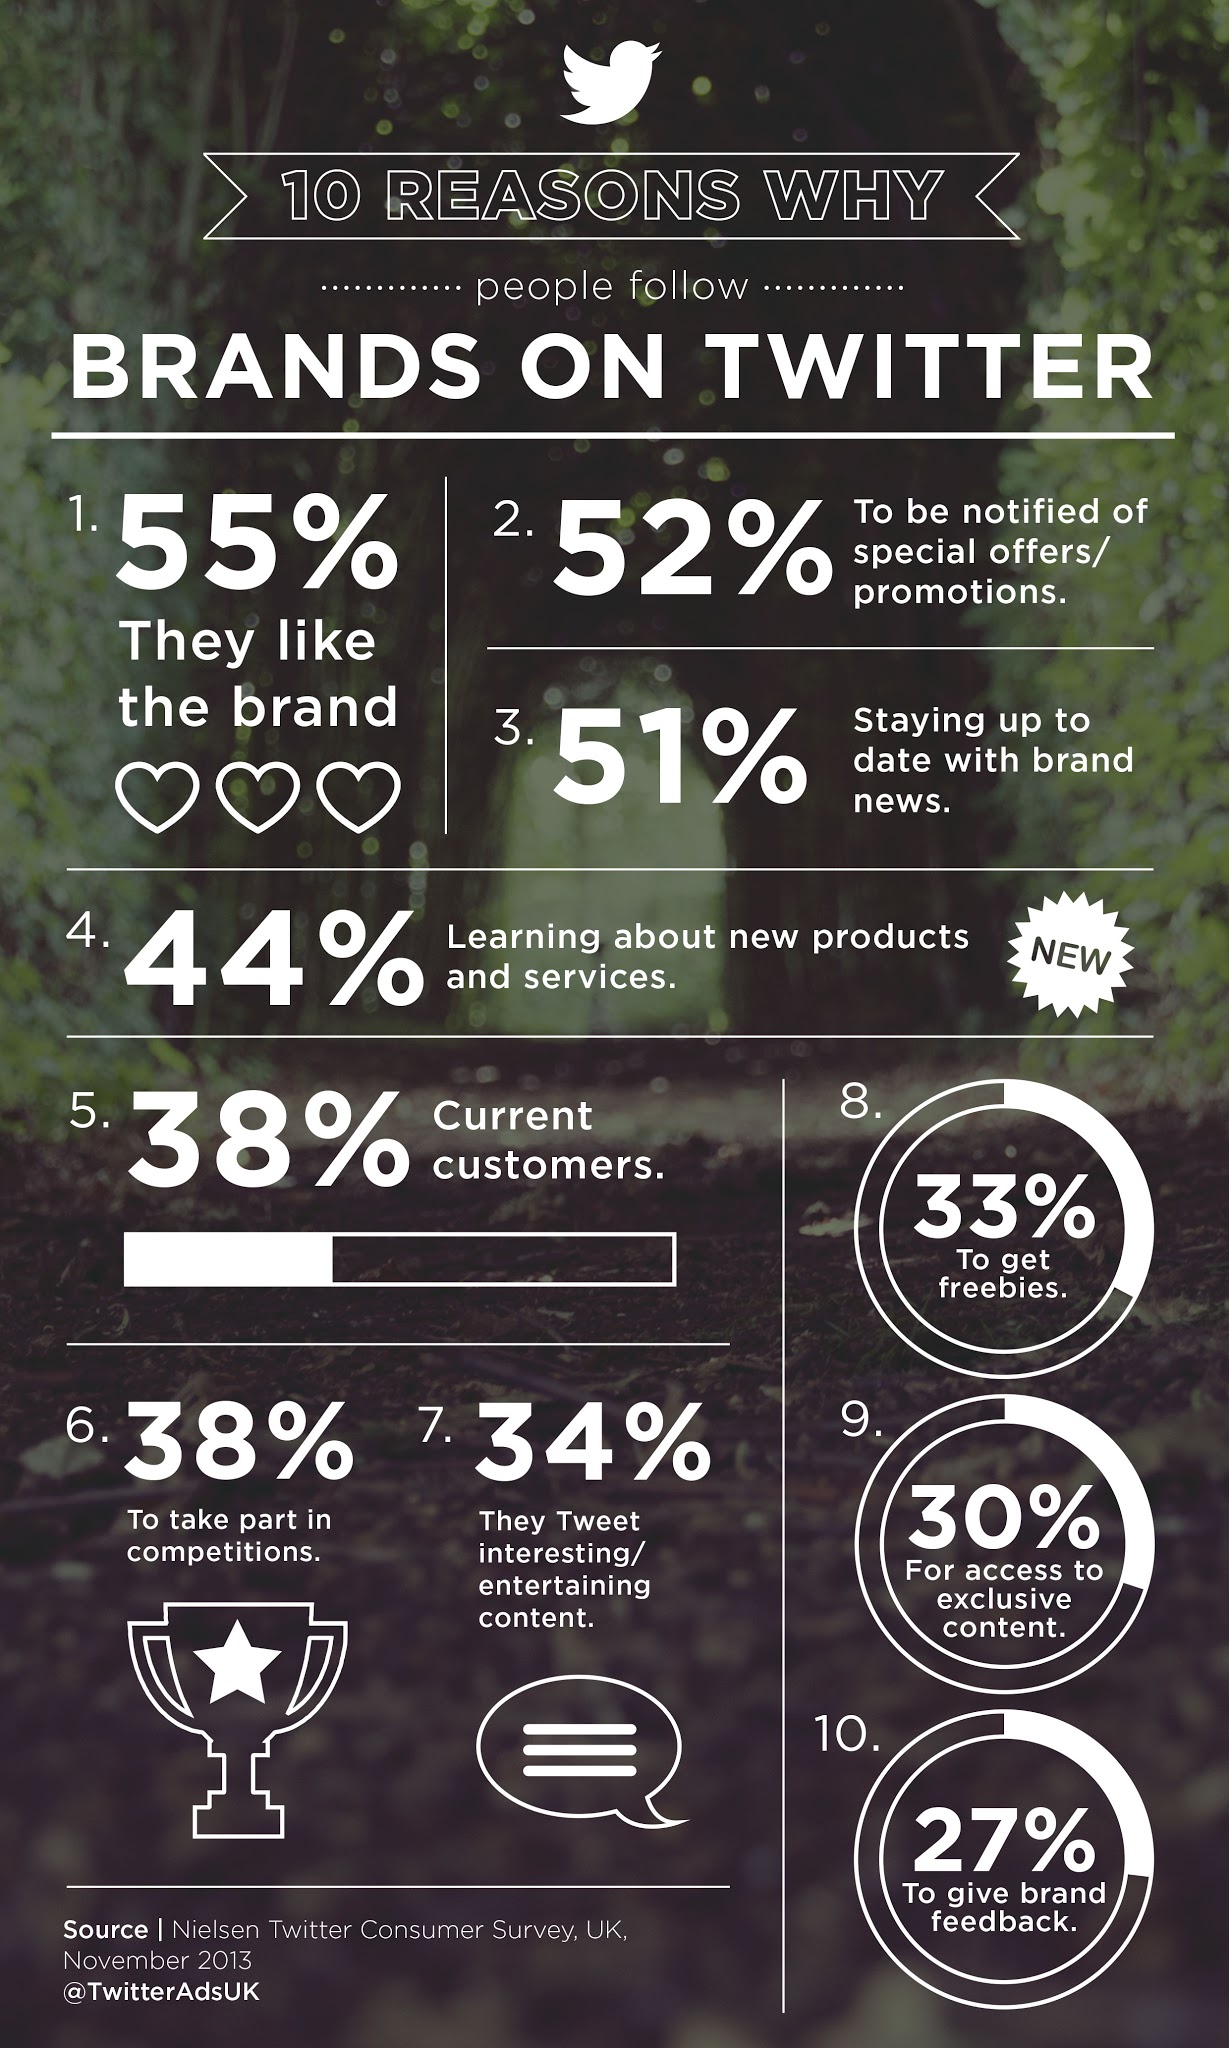 10 reasons why people follow brands on Twitter - infographic